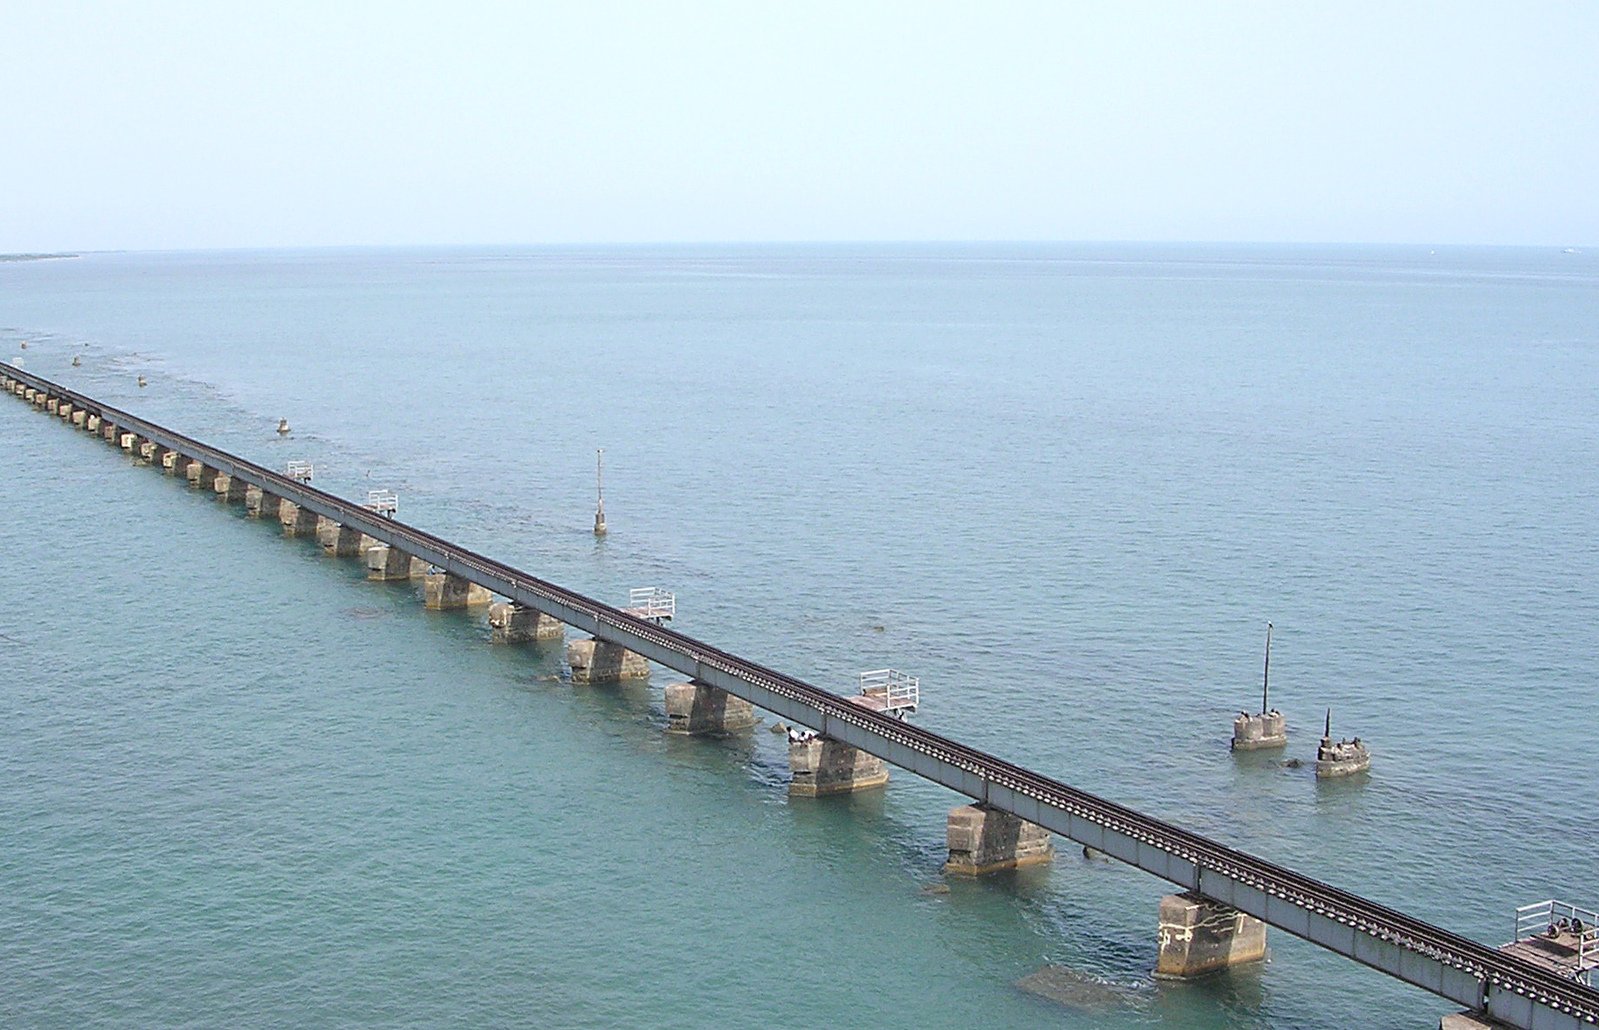 the bridge is connecting two ships to cross a high body of water